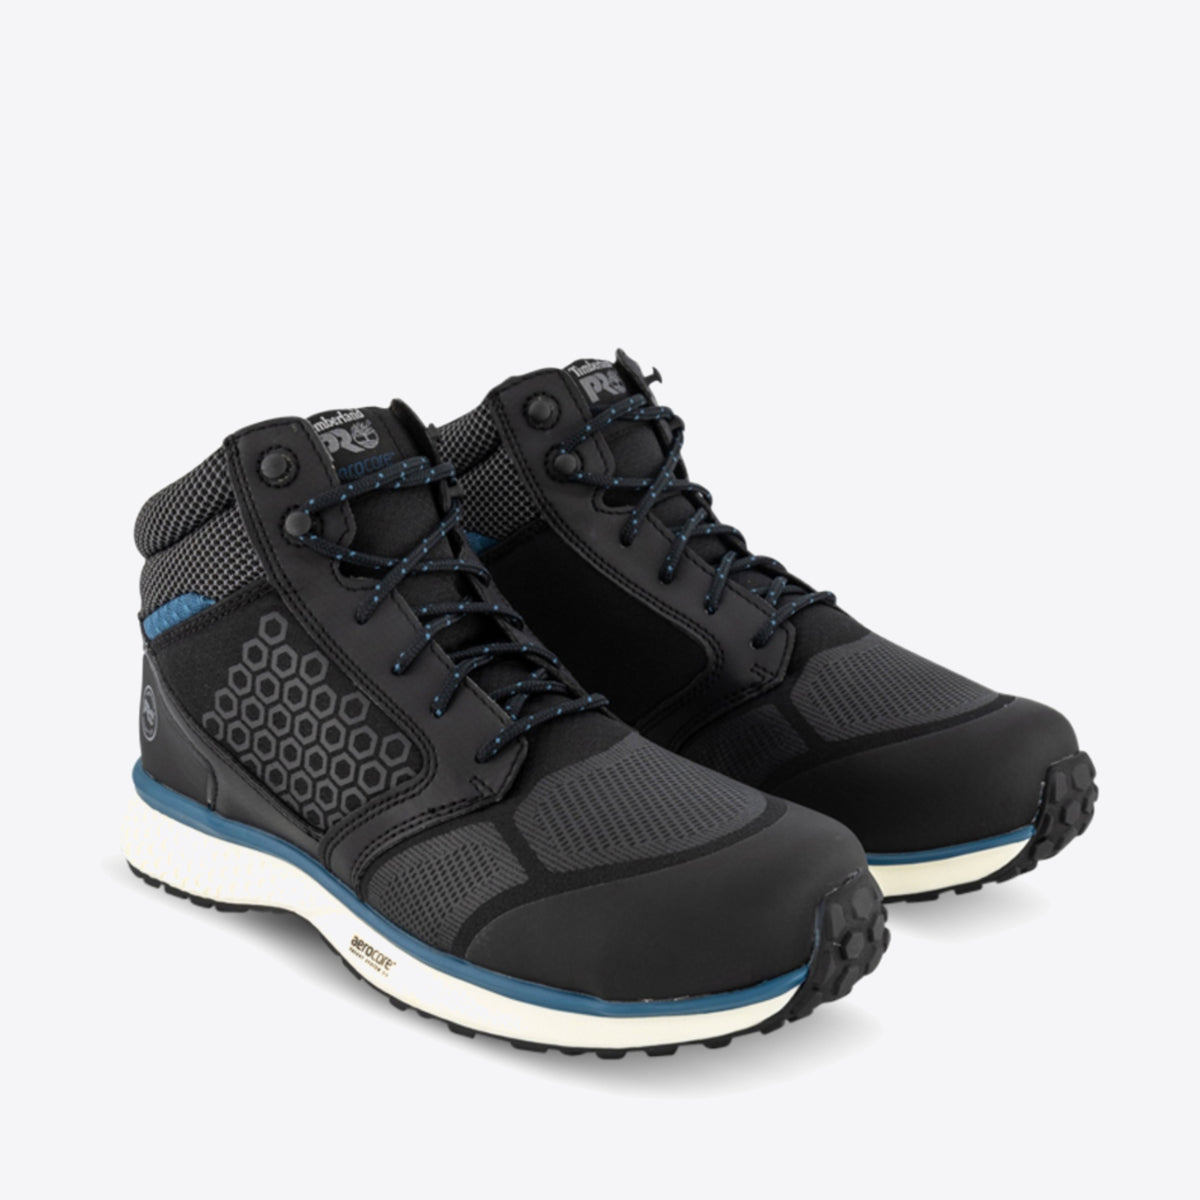 TIMBERLAND PRO Reaxion Mid Black/Blue - Image 4